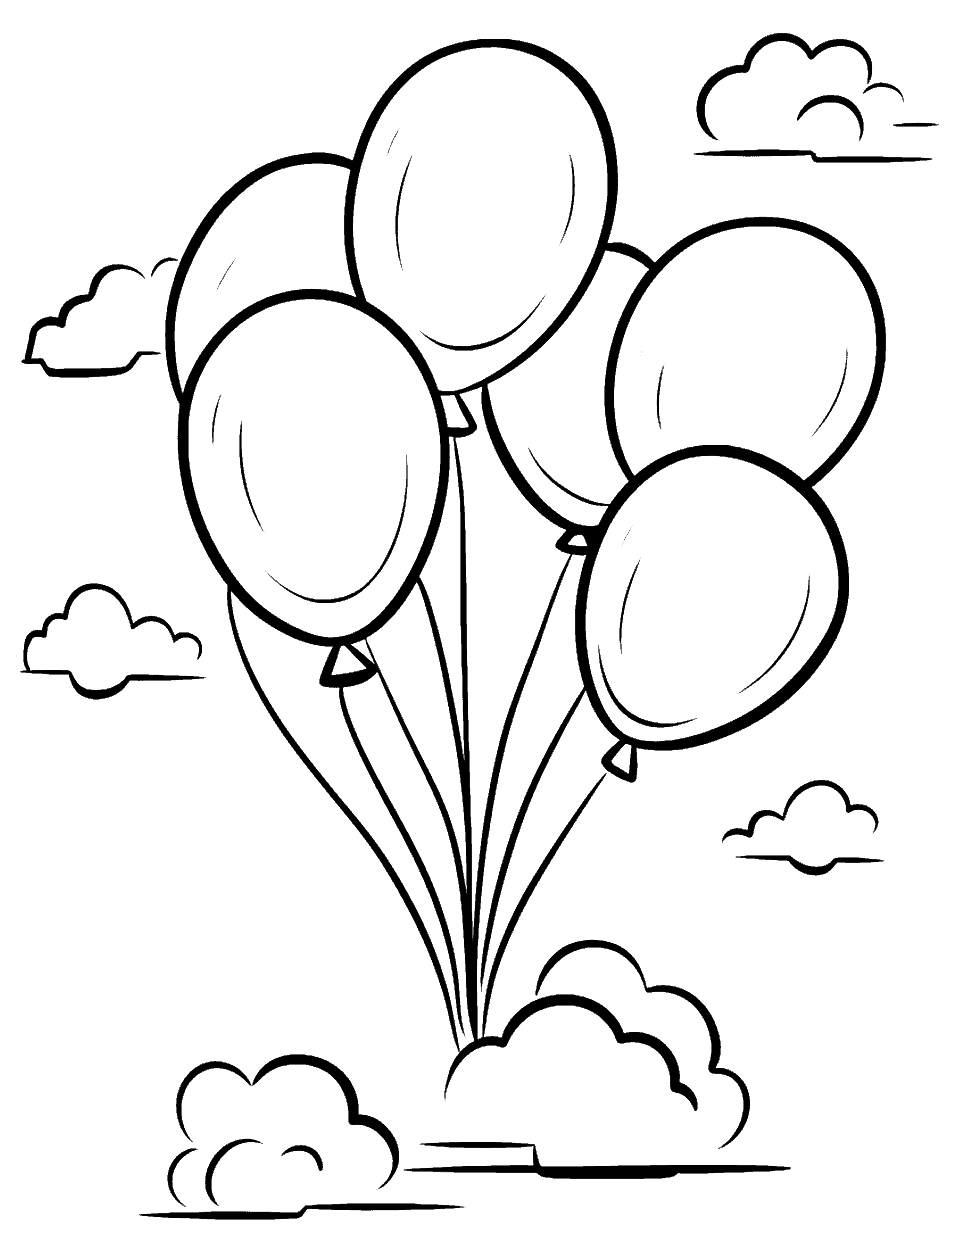 Colorful Balloons Coloring Page - A bunch of balloons floating in the sky.